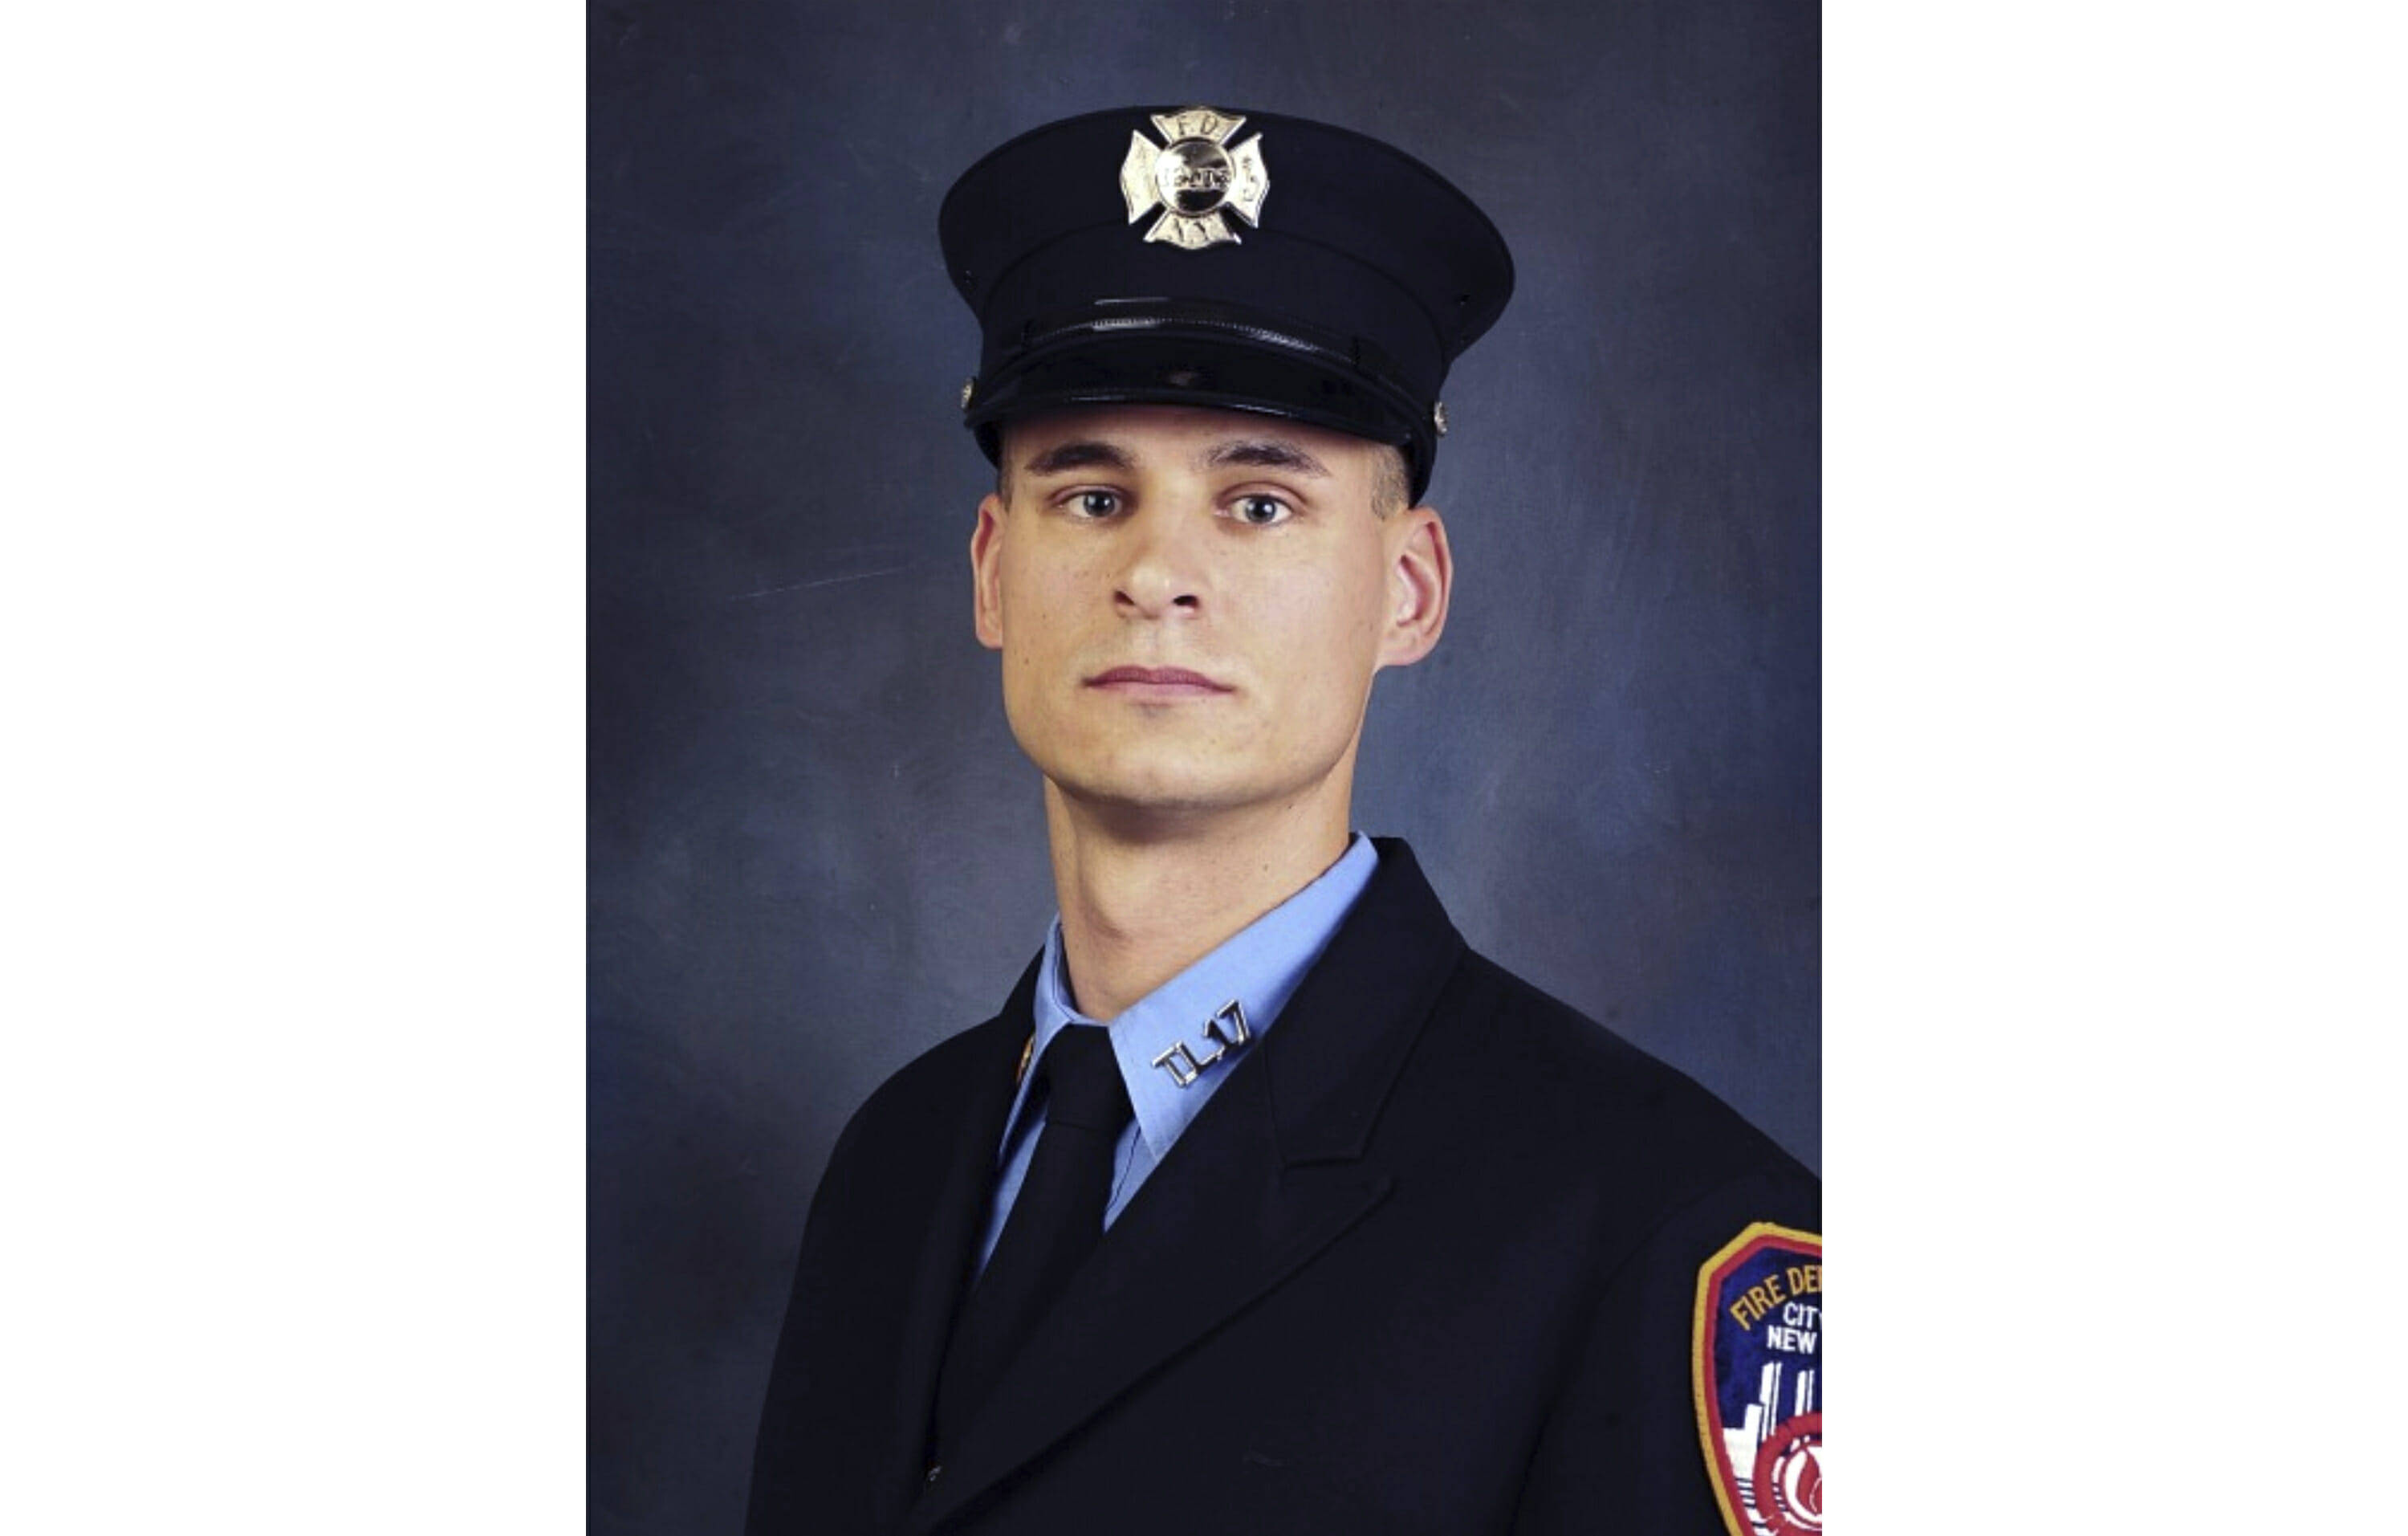 This undated photo, provided in New York, Tuesday April 9, 2019, shows Fire Department of New York firefighter Christopher Slutman.